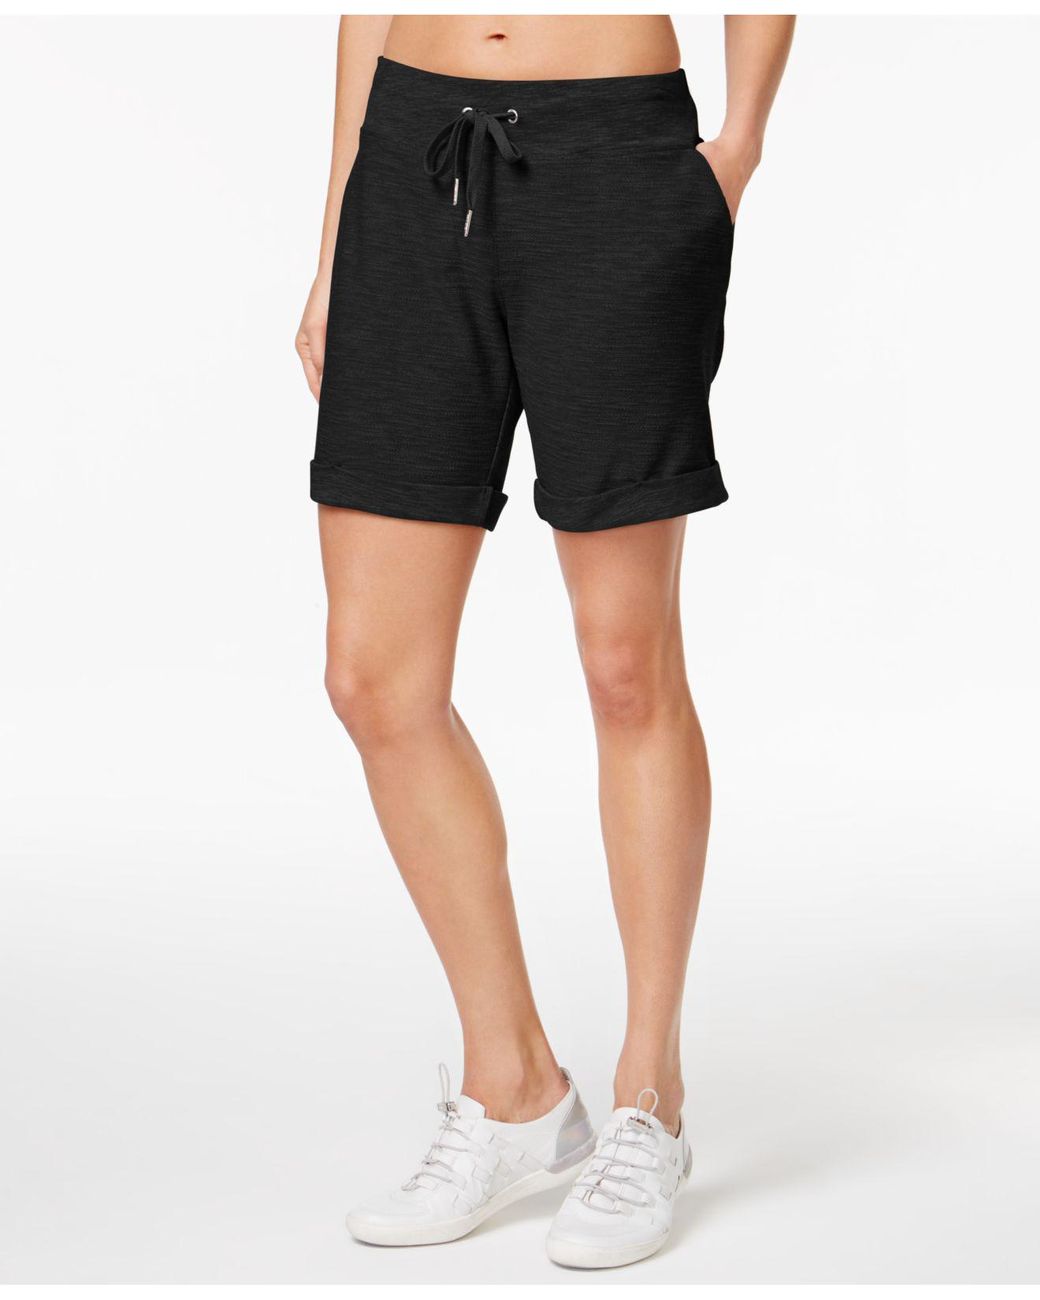 CALVIN KLEIN 205W39NYC Cuffed French Terry Shorts in Black